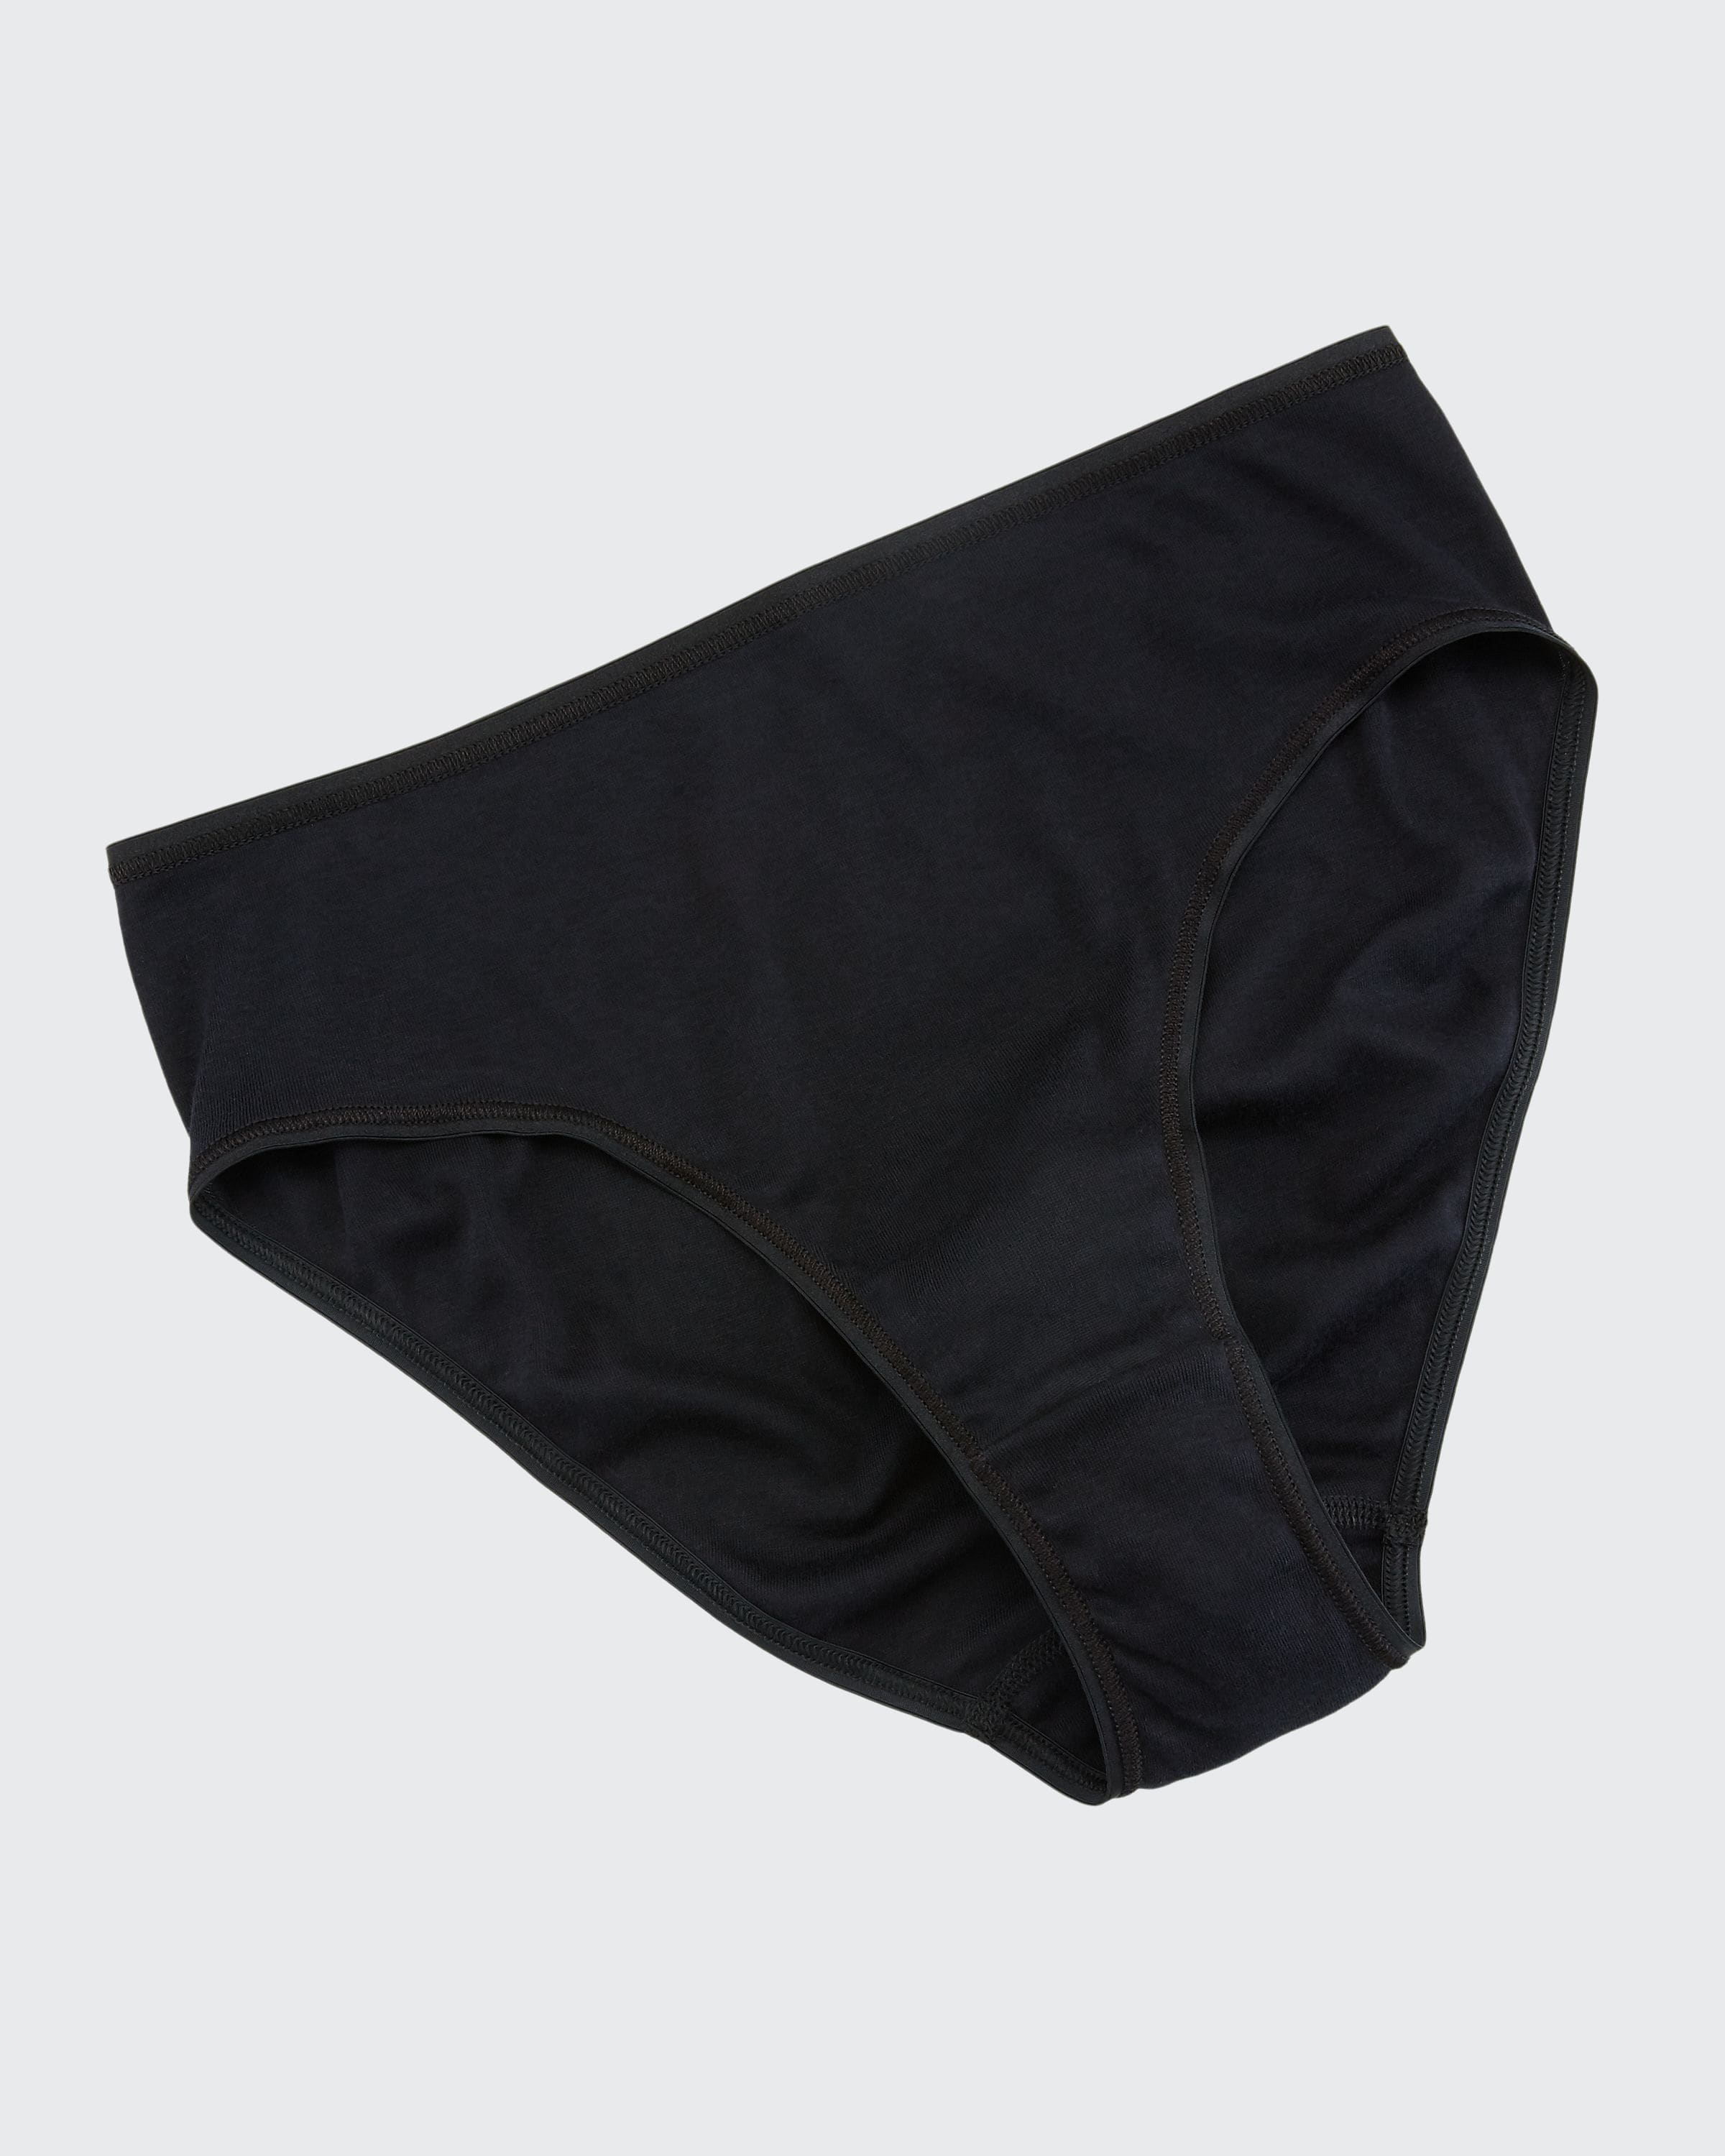 Hi Cut Full Brief in colour black from the Cotton Seamless collection by  HANRO.